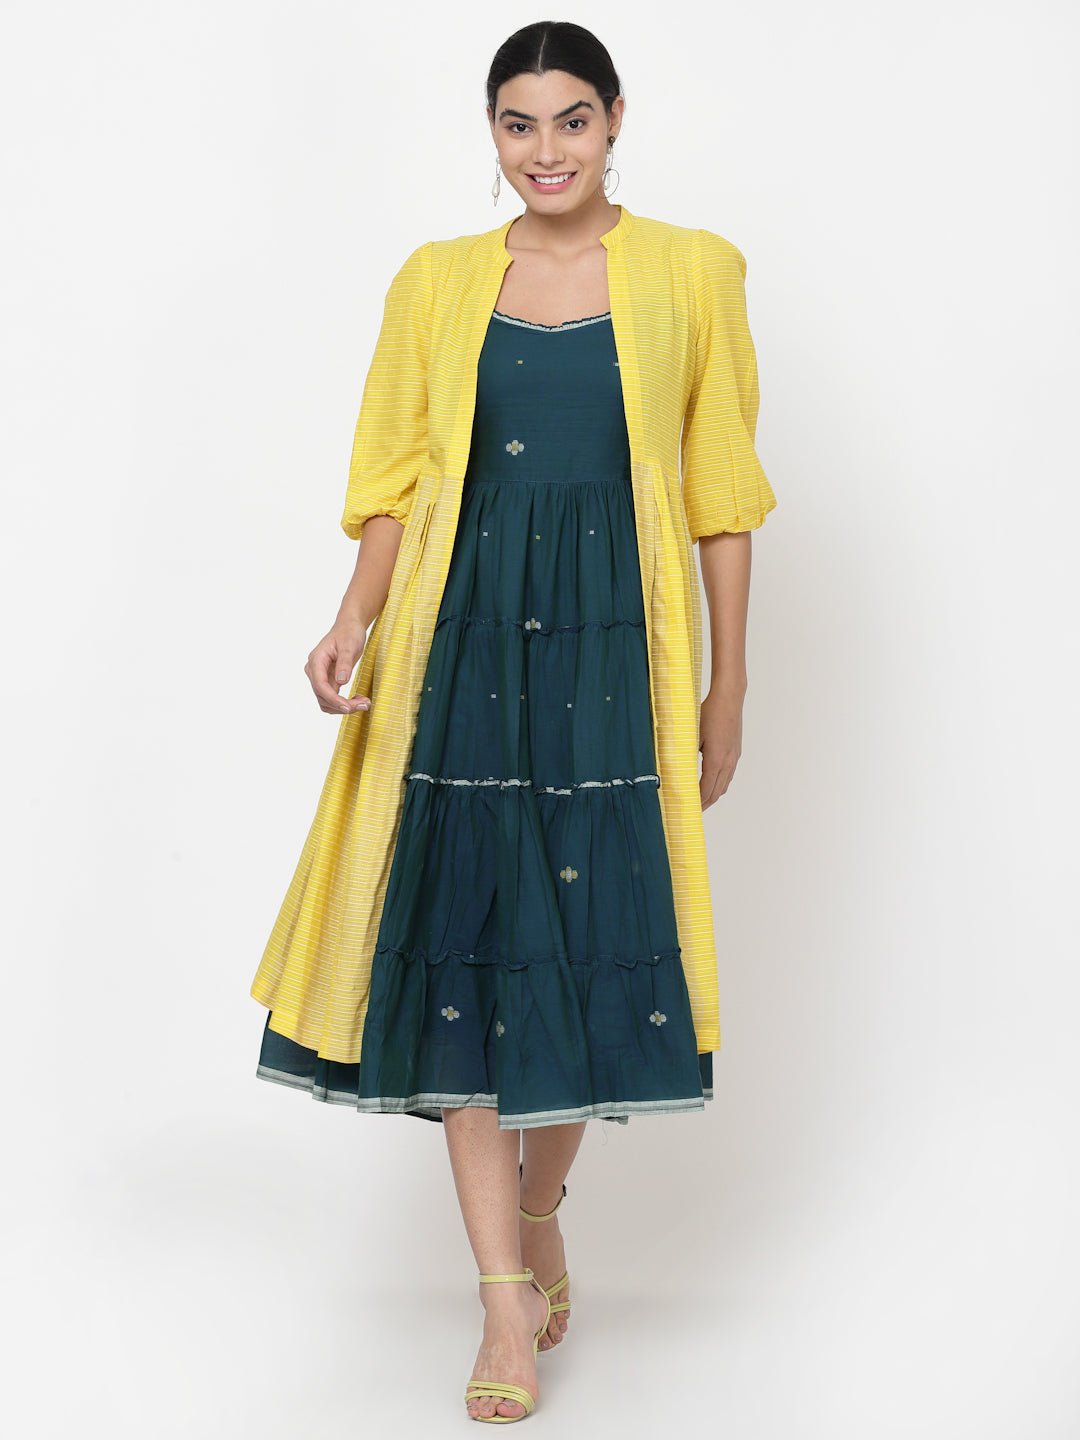 Teal Green Tiered Midi Dress With Yellow Cover-up Jacket - Dresses - APANAKAH